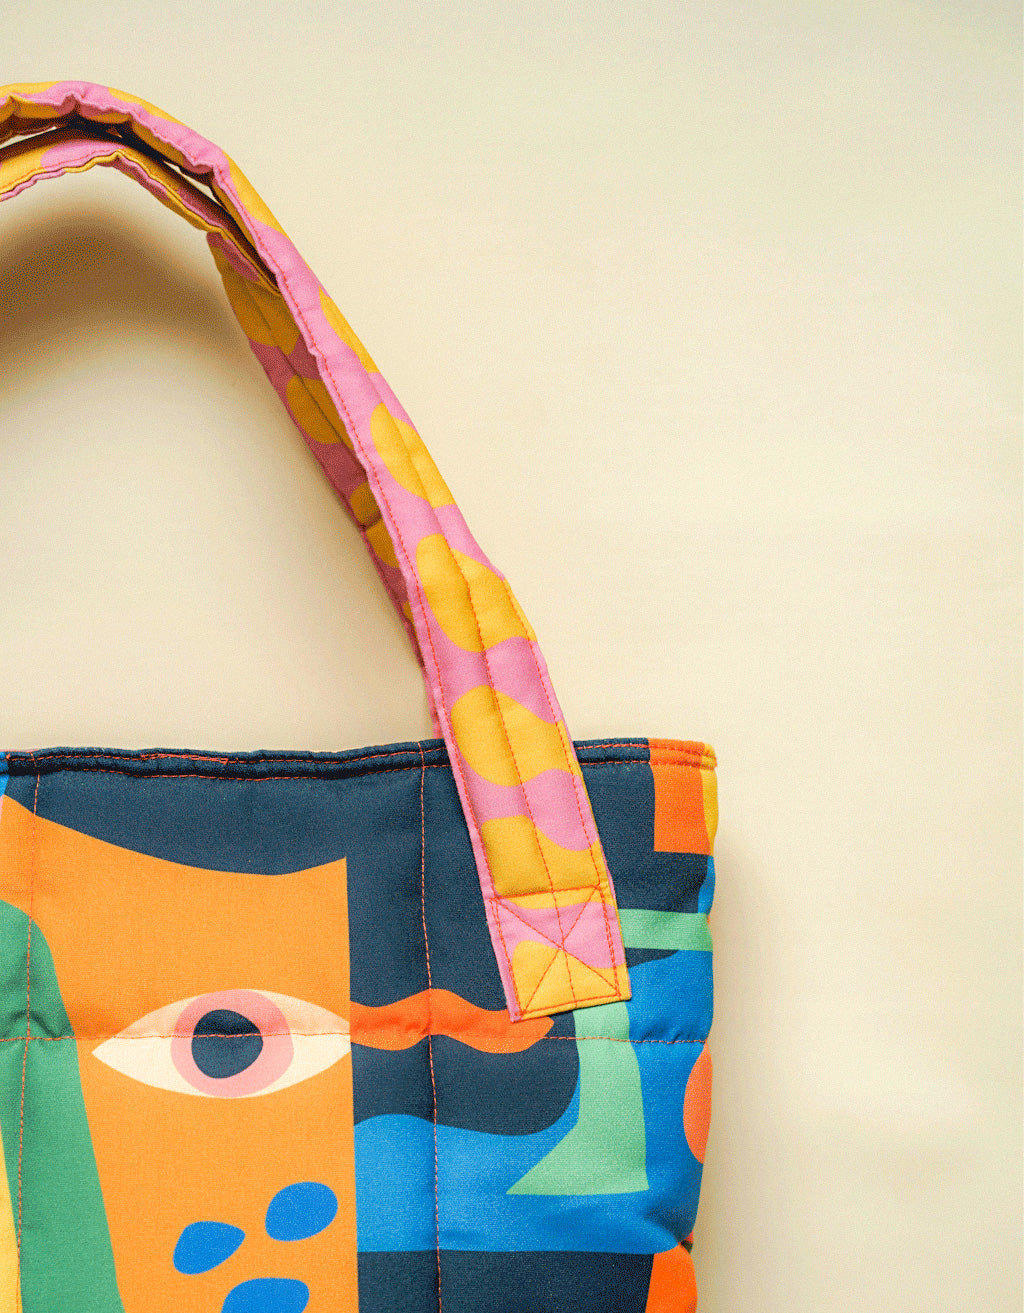 Marshmallow Bag - Picasso – SmittenbyPattern